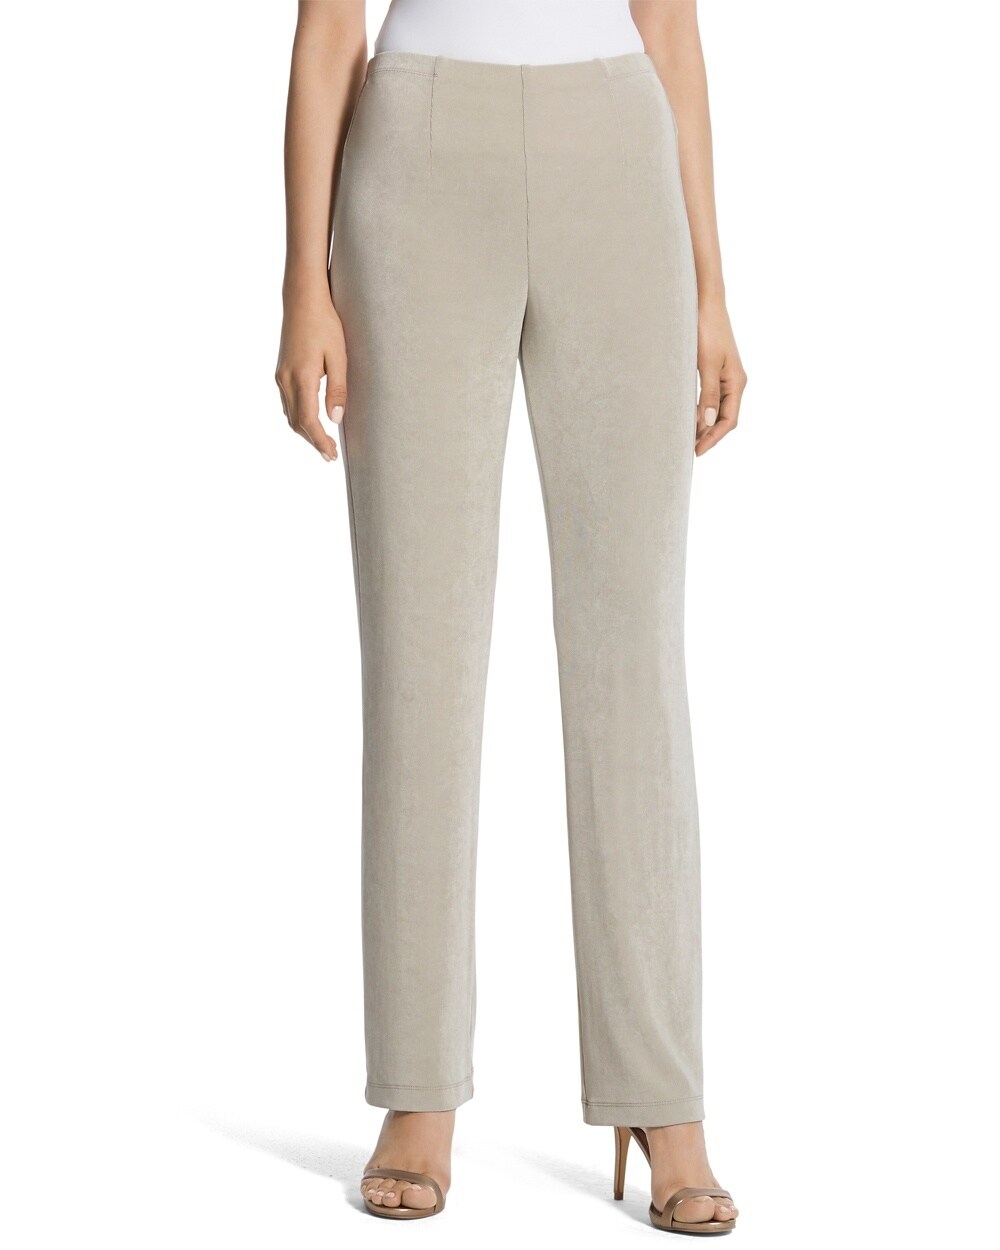 Travelers Classic No Tummy Pants Tall Length - Chico's